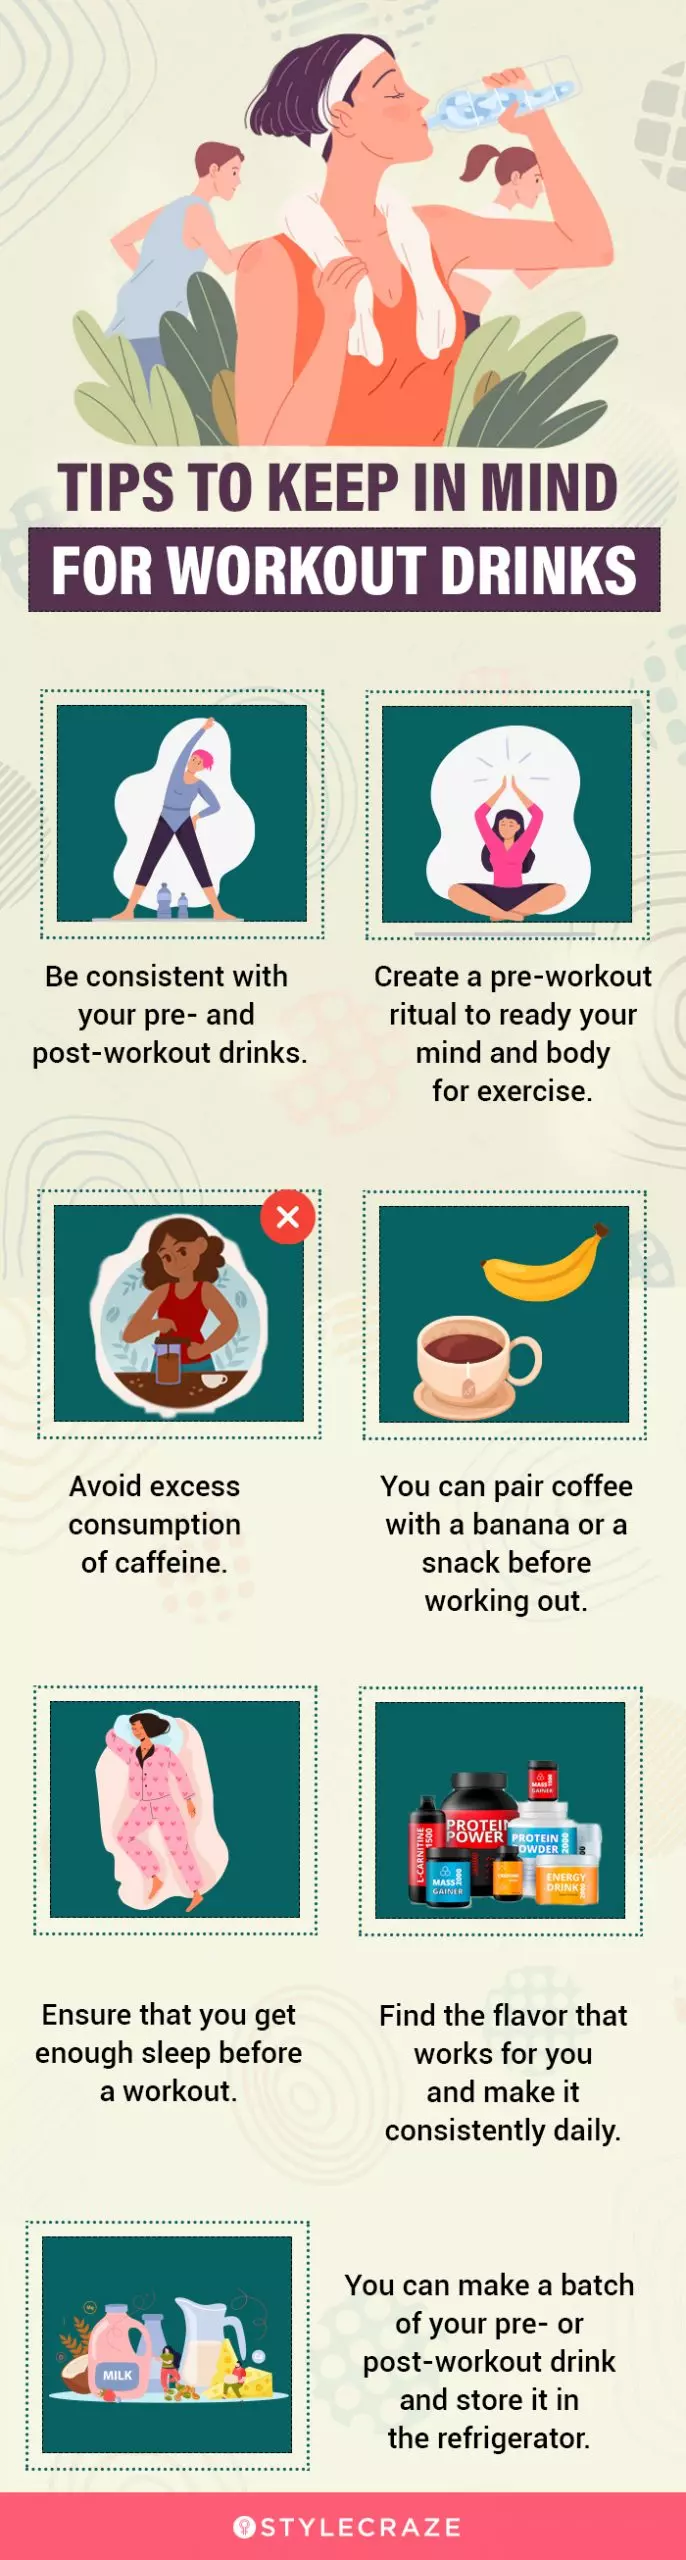 tips to keep in mind for workout drinks (infographic)